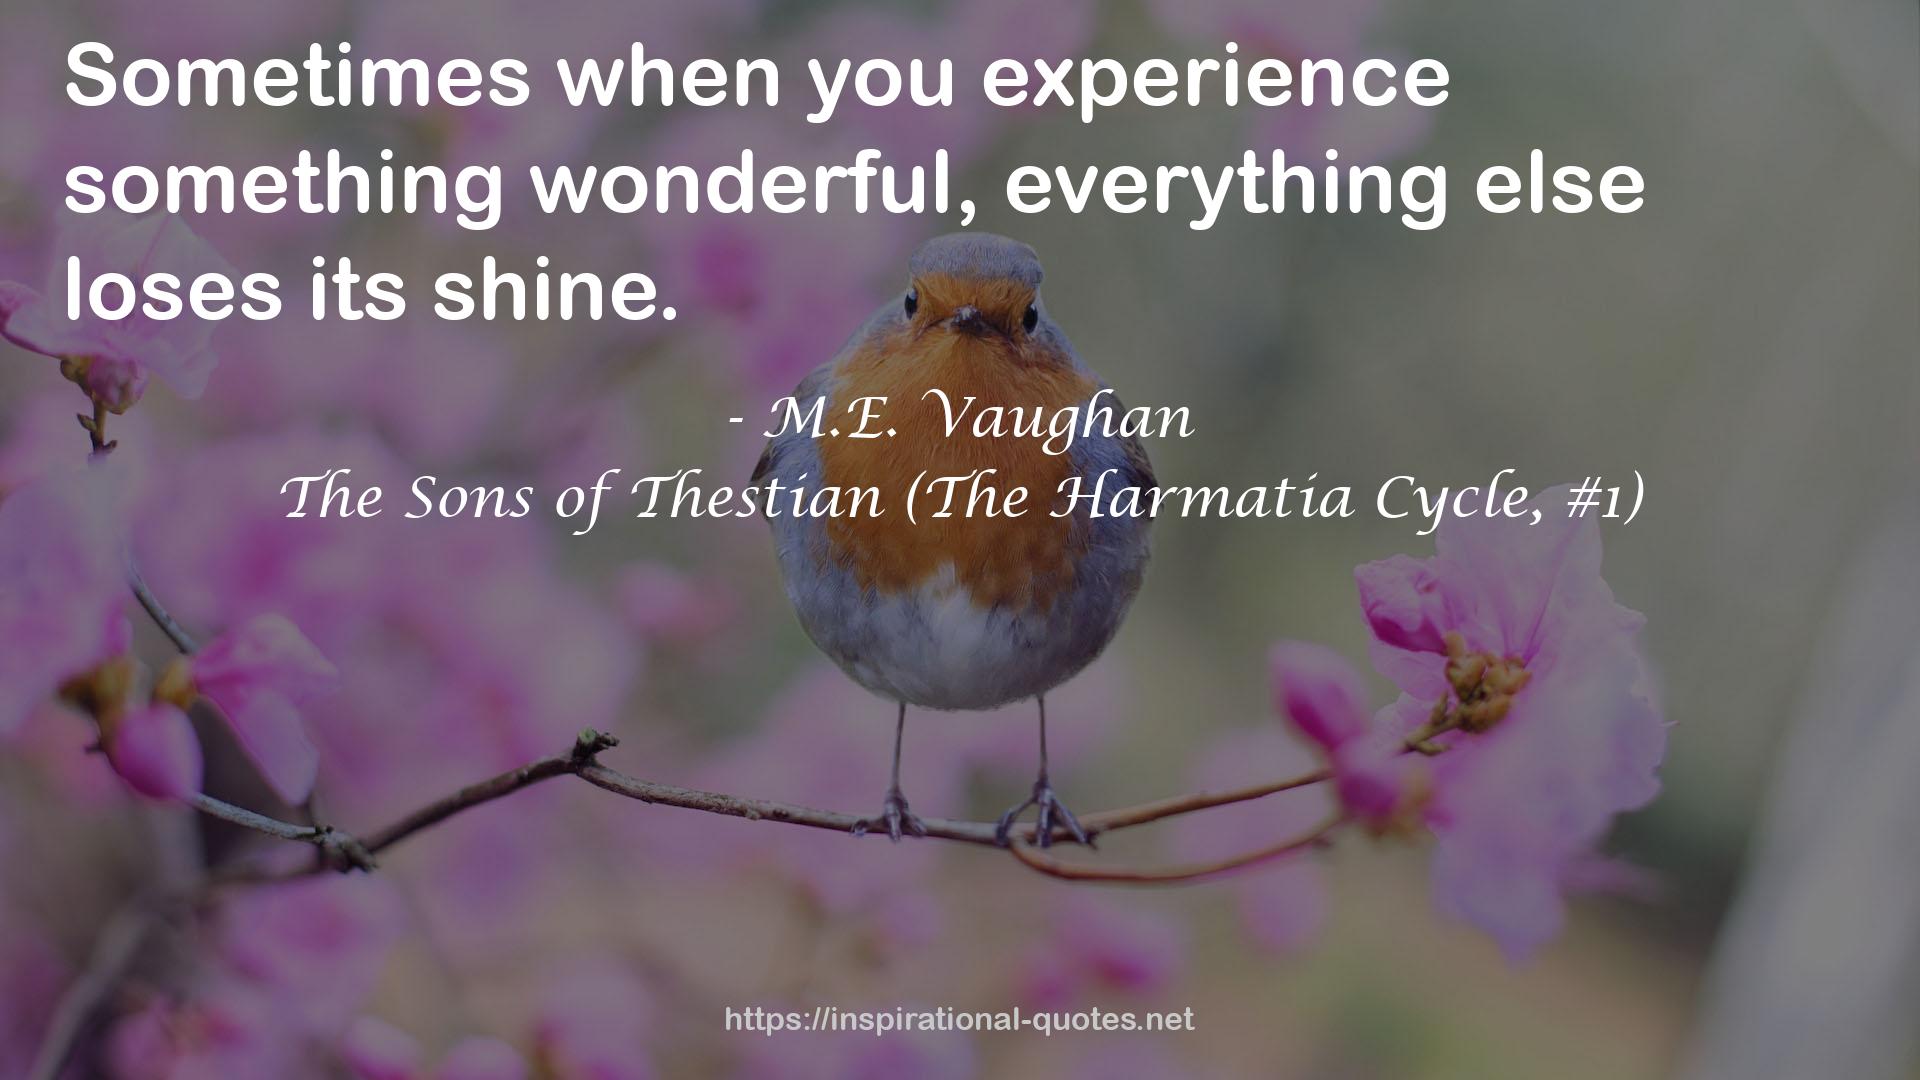 M.E. Vaughan QUOTES